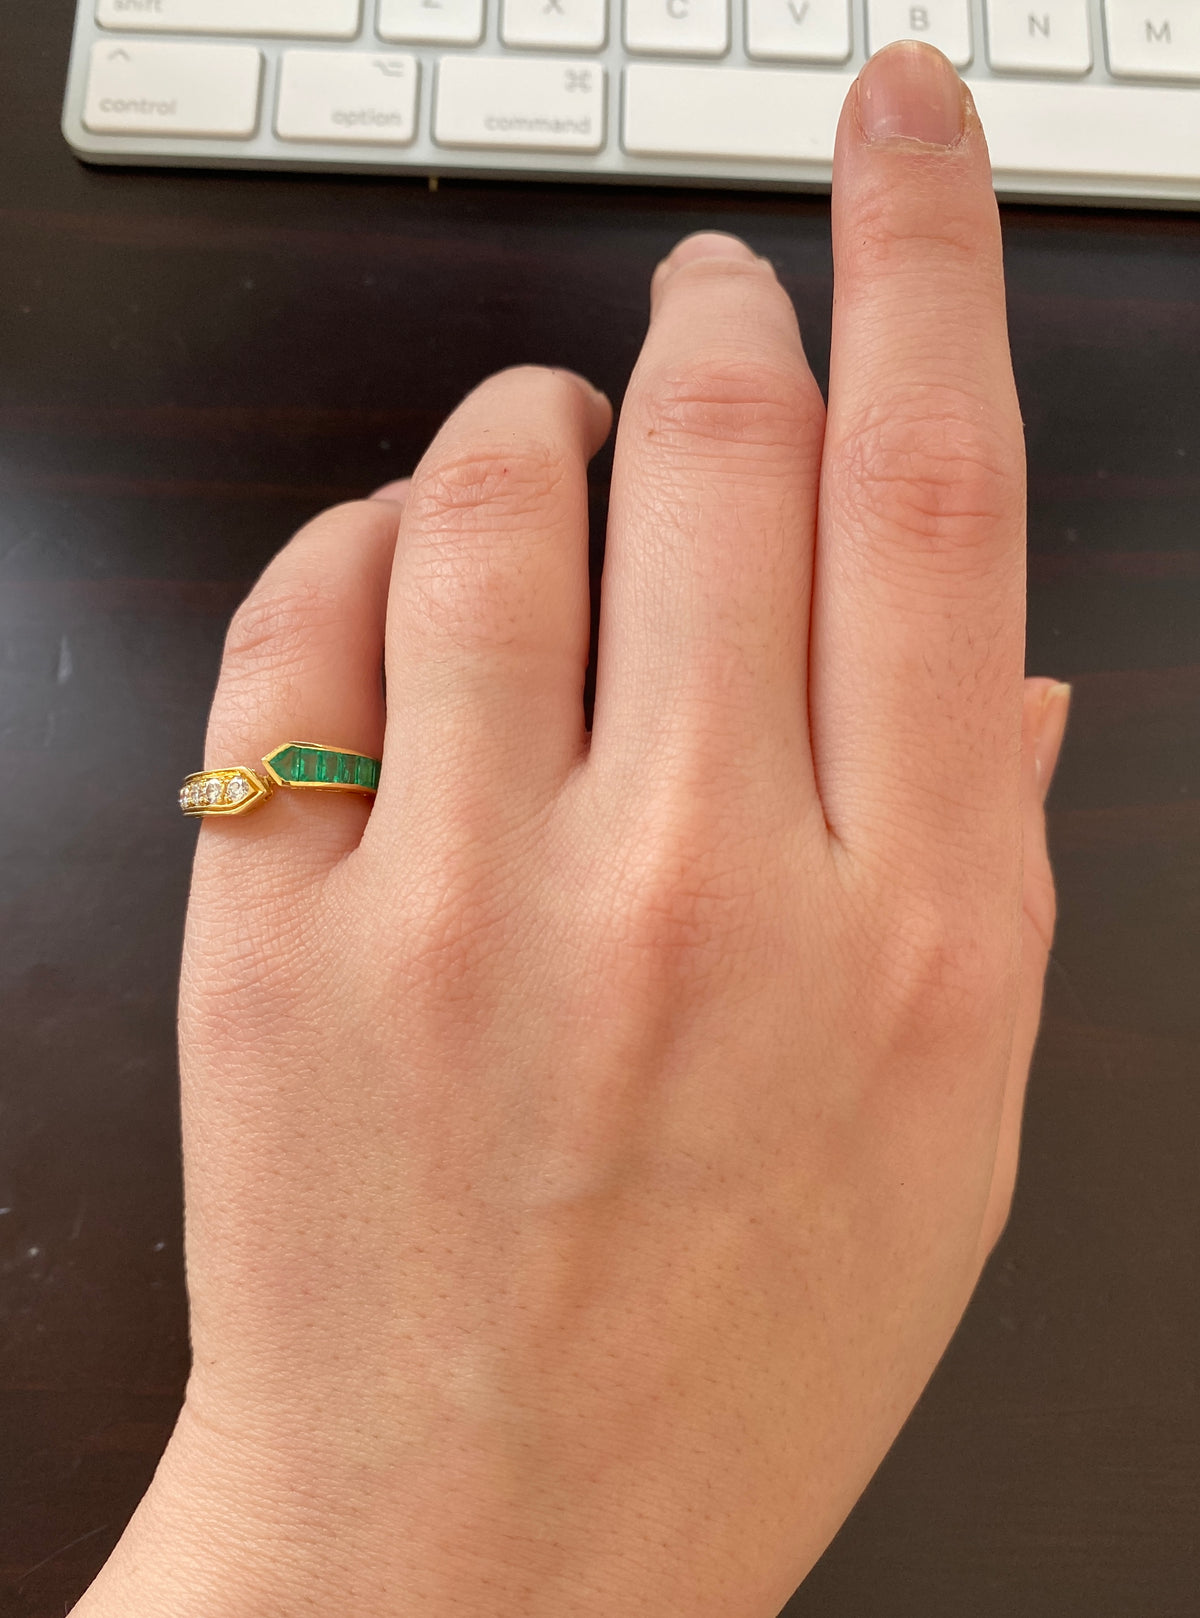 Vintage 18K Gold Diamond and Emerald Bypass Ring, Stacking Band